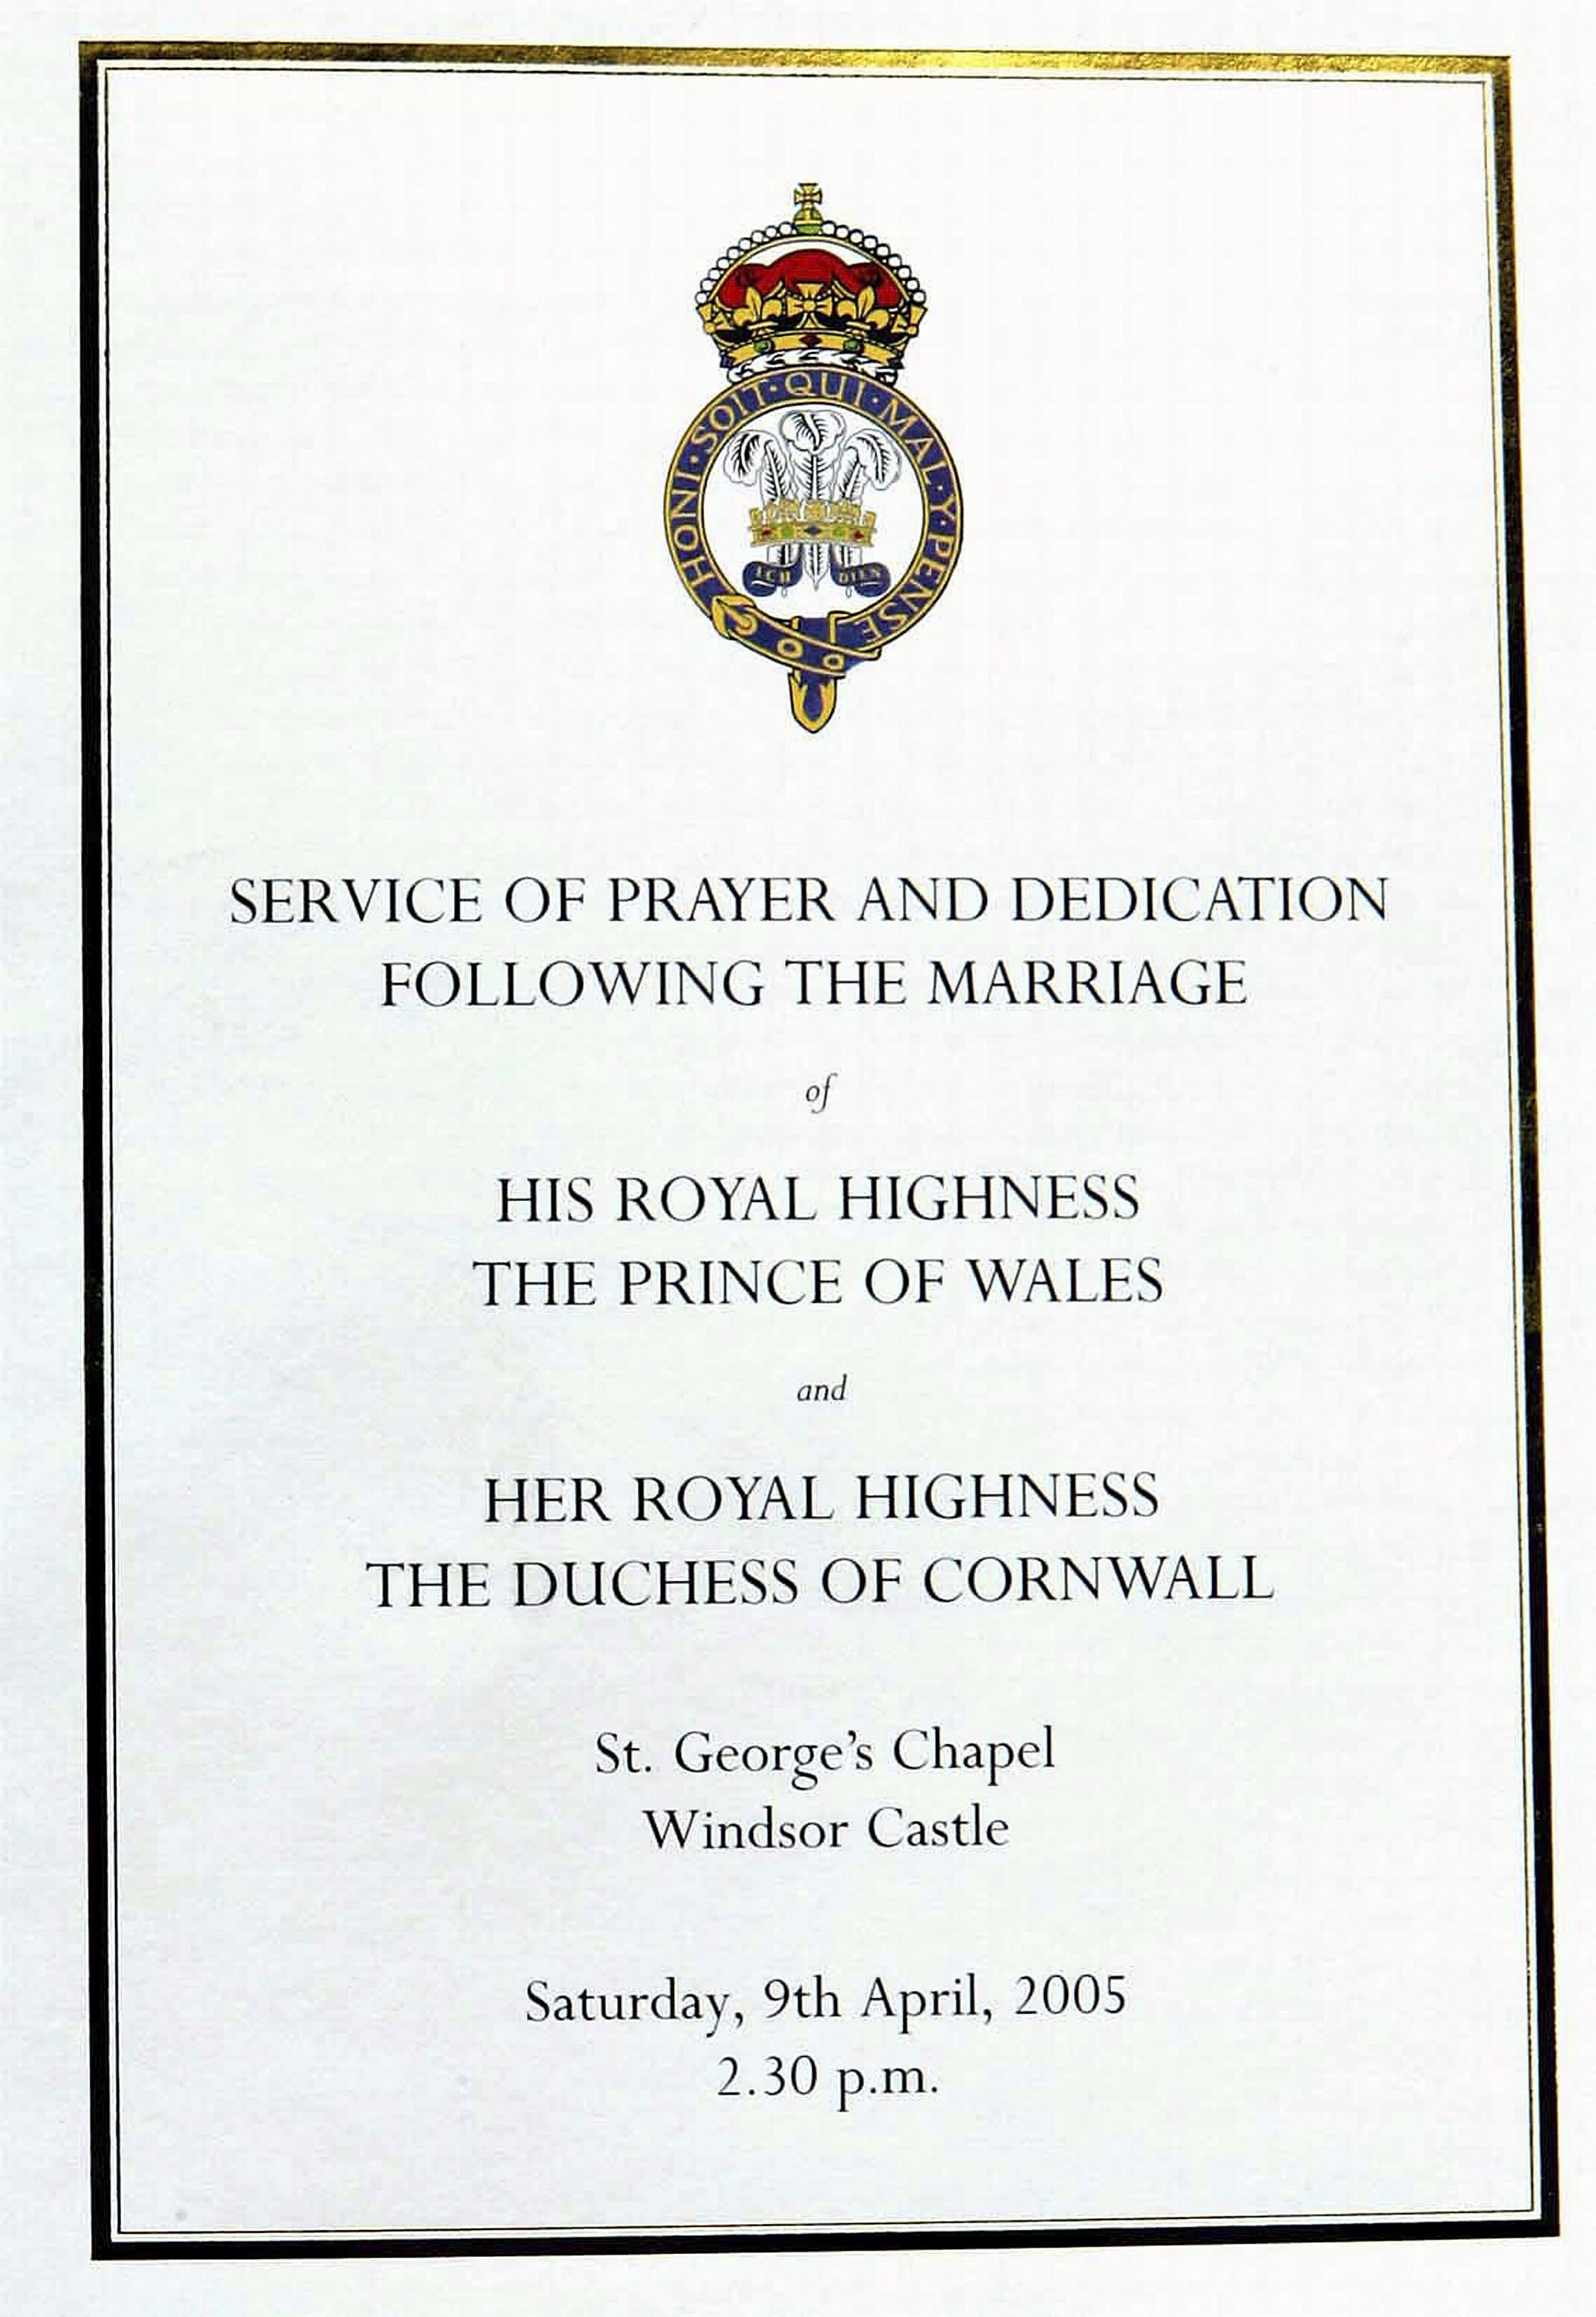 The official program for the Service of Prayer and Dedication for TRH Prince Charles, the Prince of Wales, and Camilla, the Duchess Of Cornwall, blessing their marriage at Windsor Castle on April 9, 2005 in Berkshire, England | Source: Getty Images